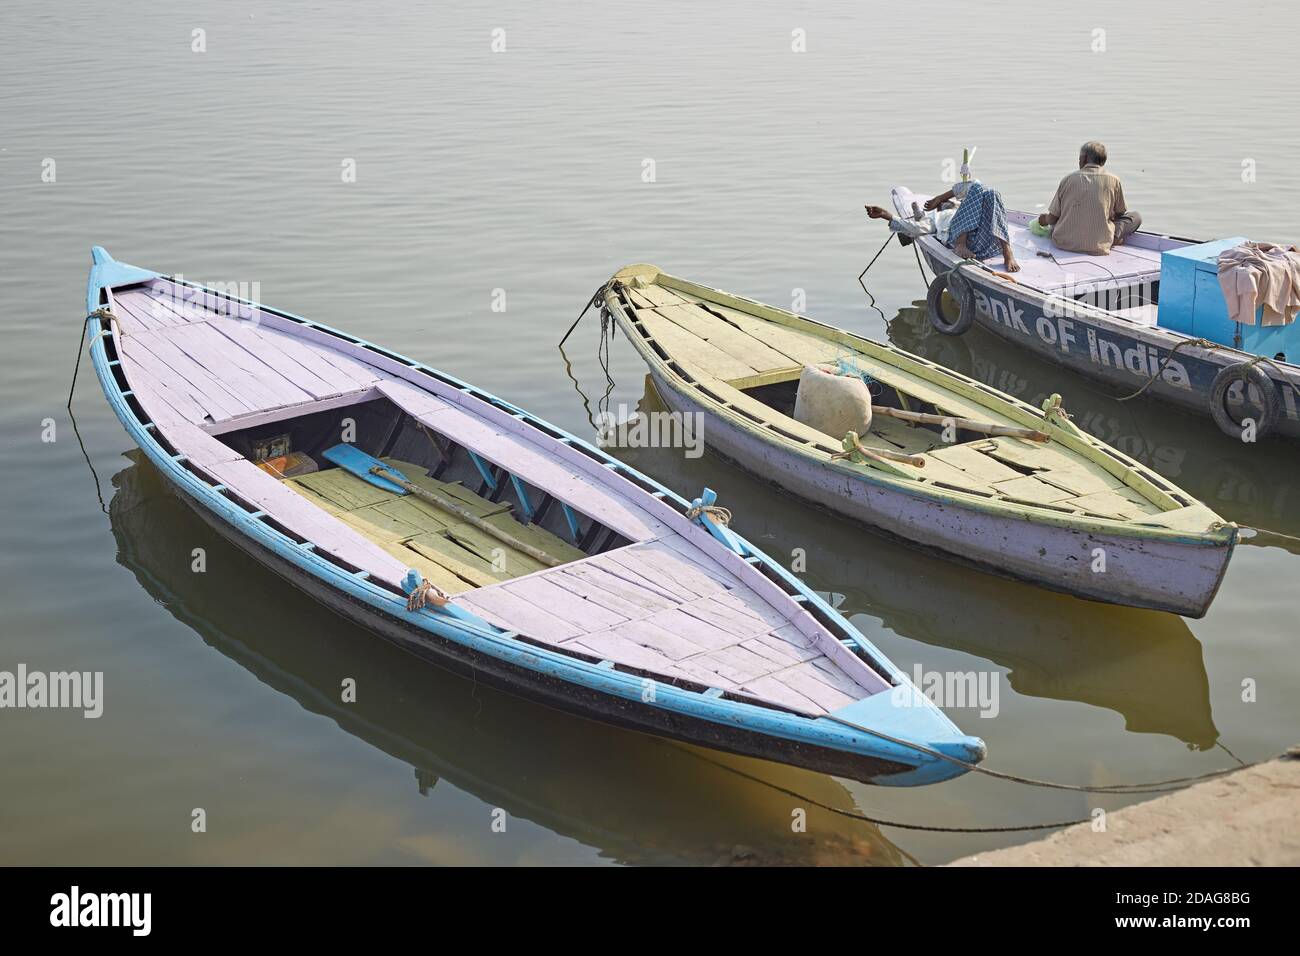 Varanasi, India, December 2015. A man sitting in a boat on the Ganges River. Stock Photo